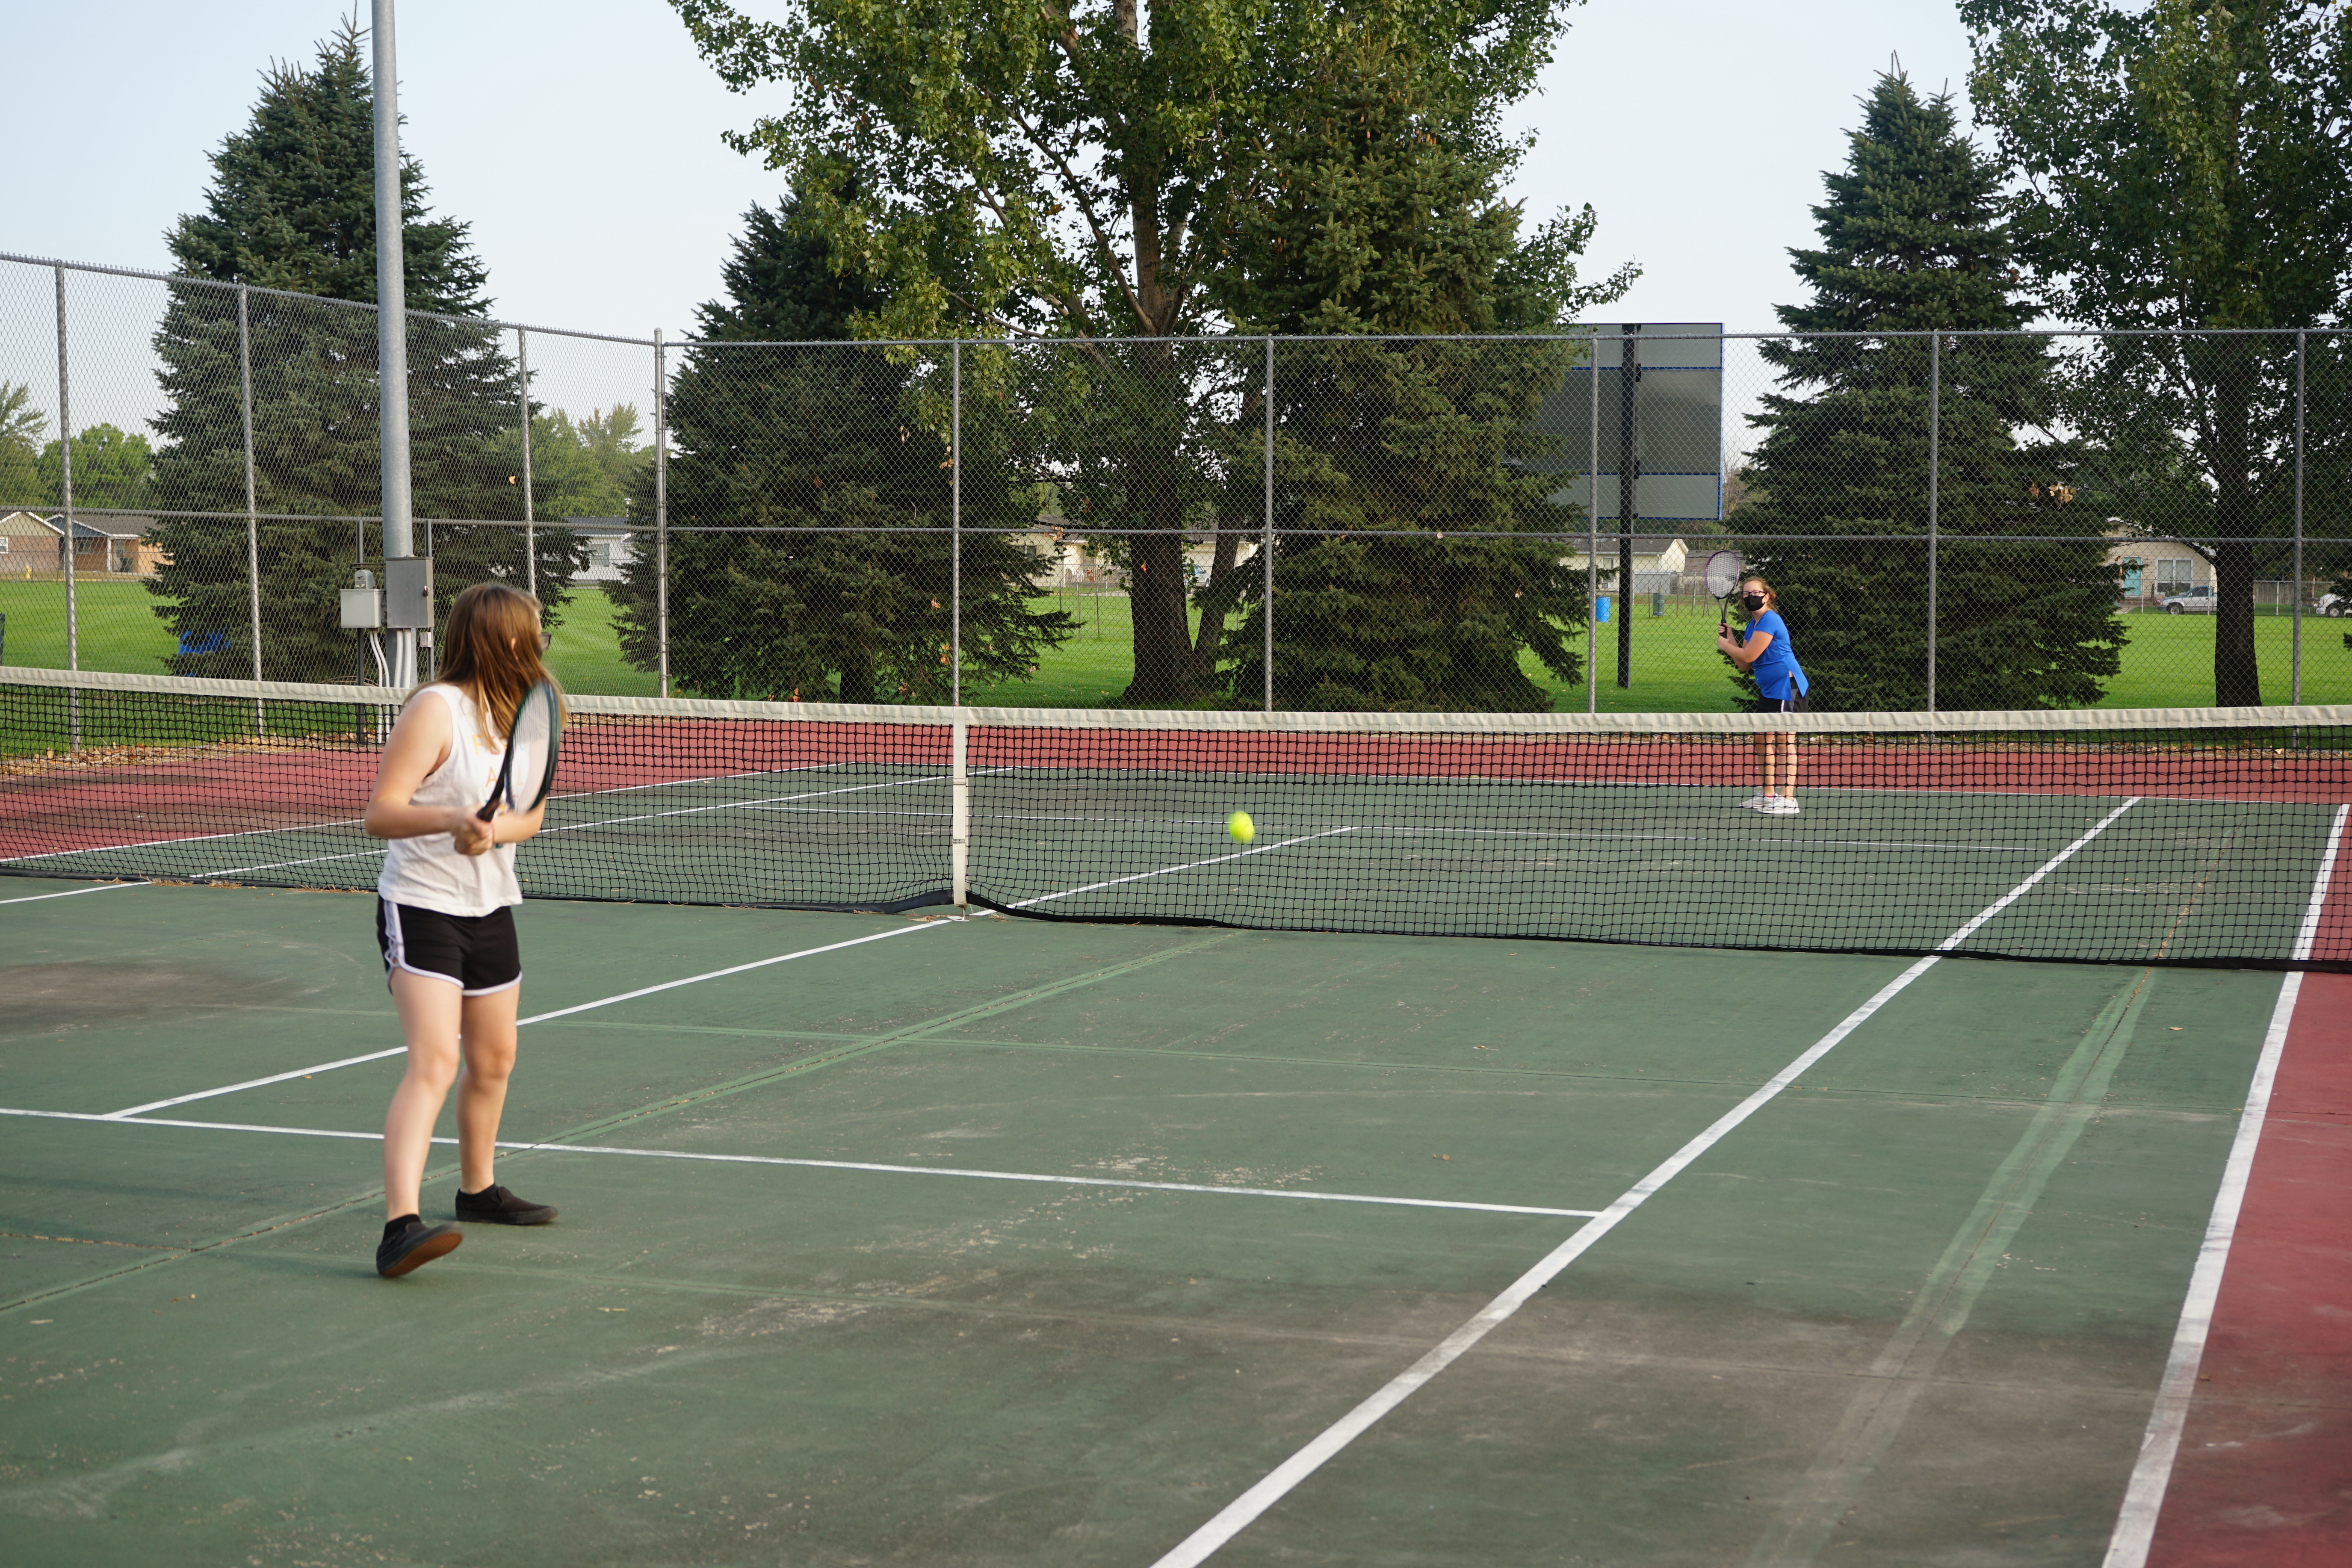 Students playing Tennis